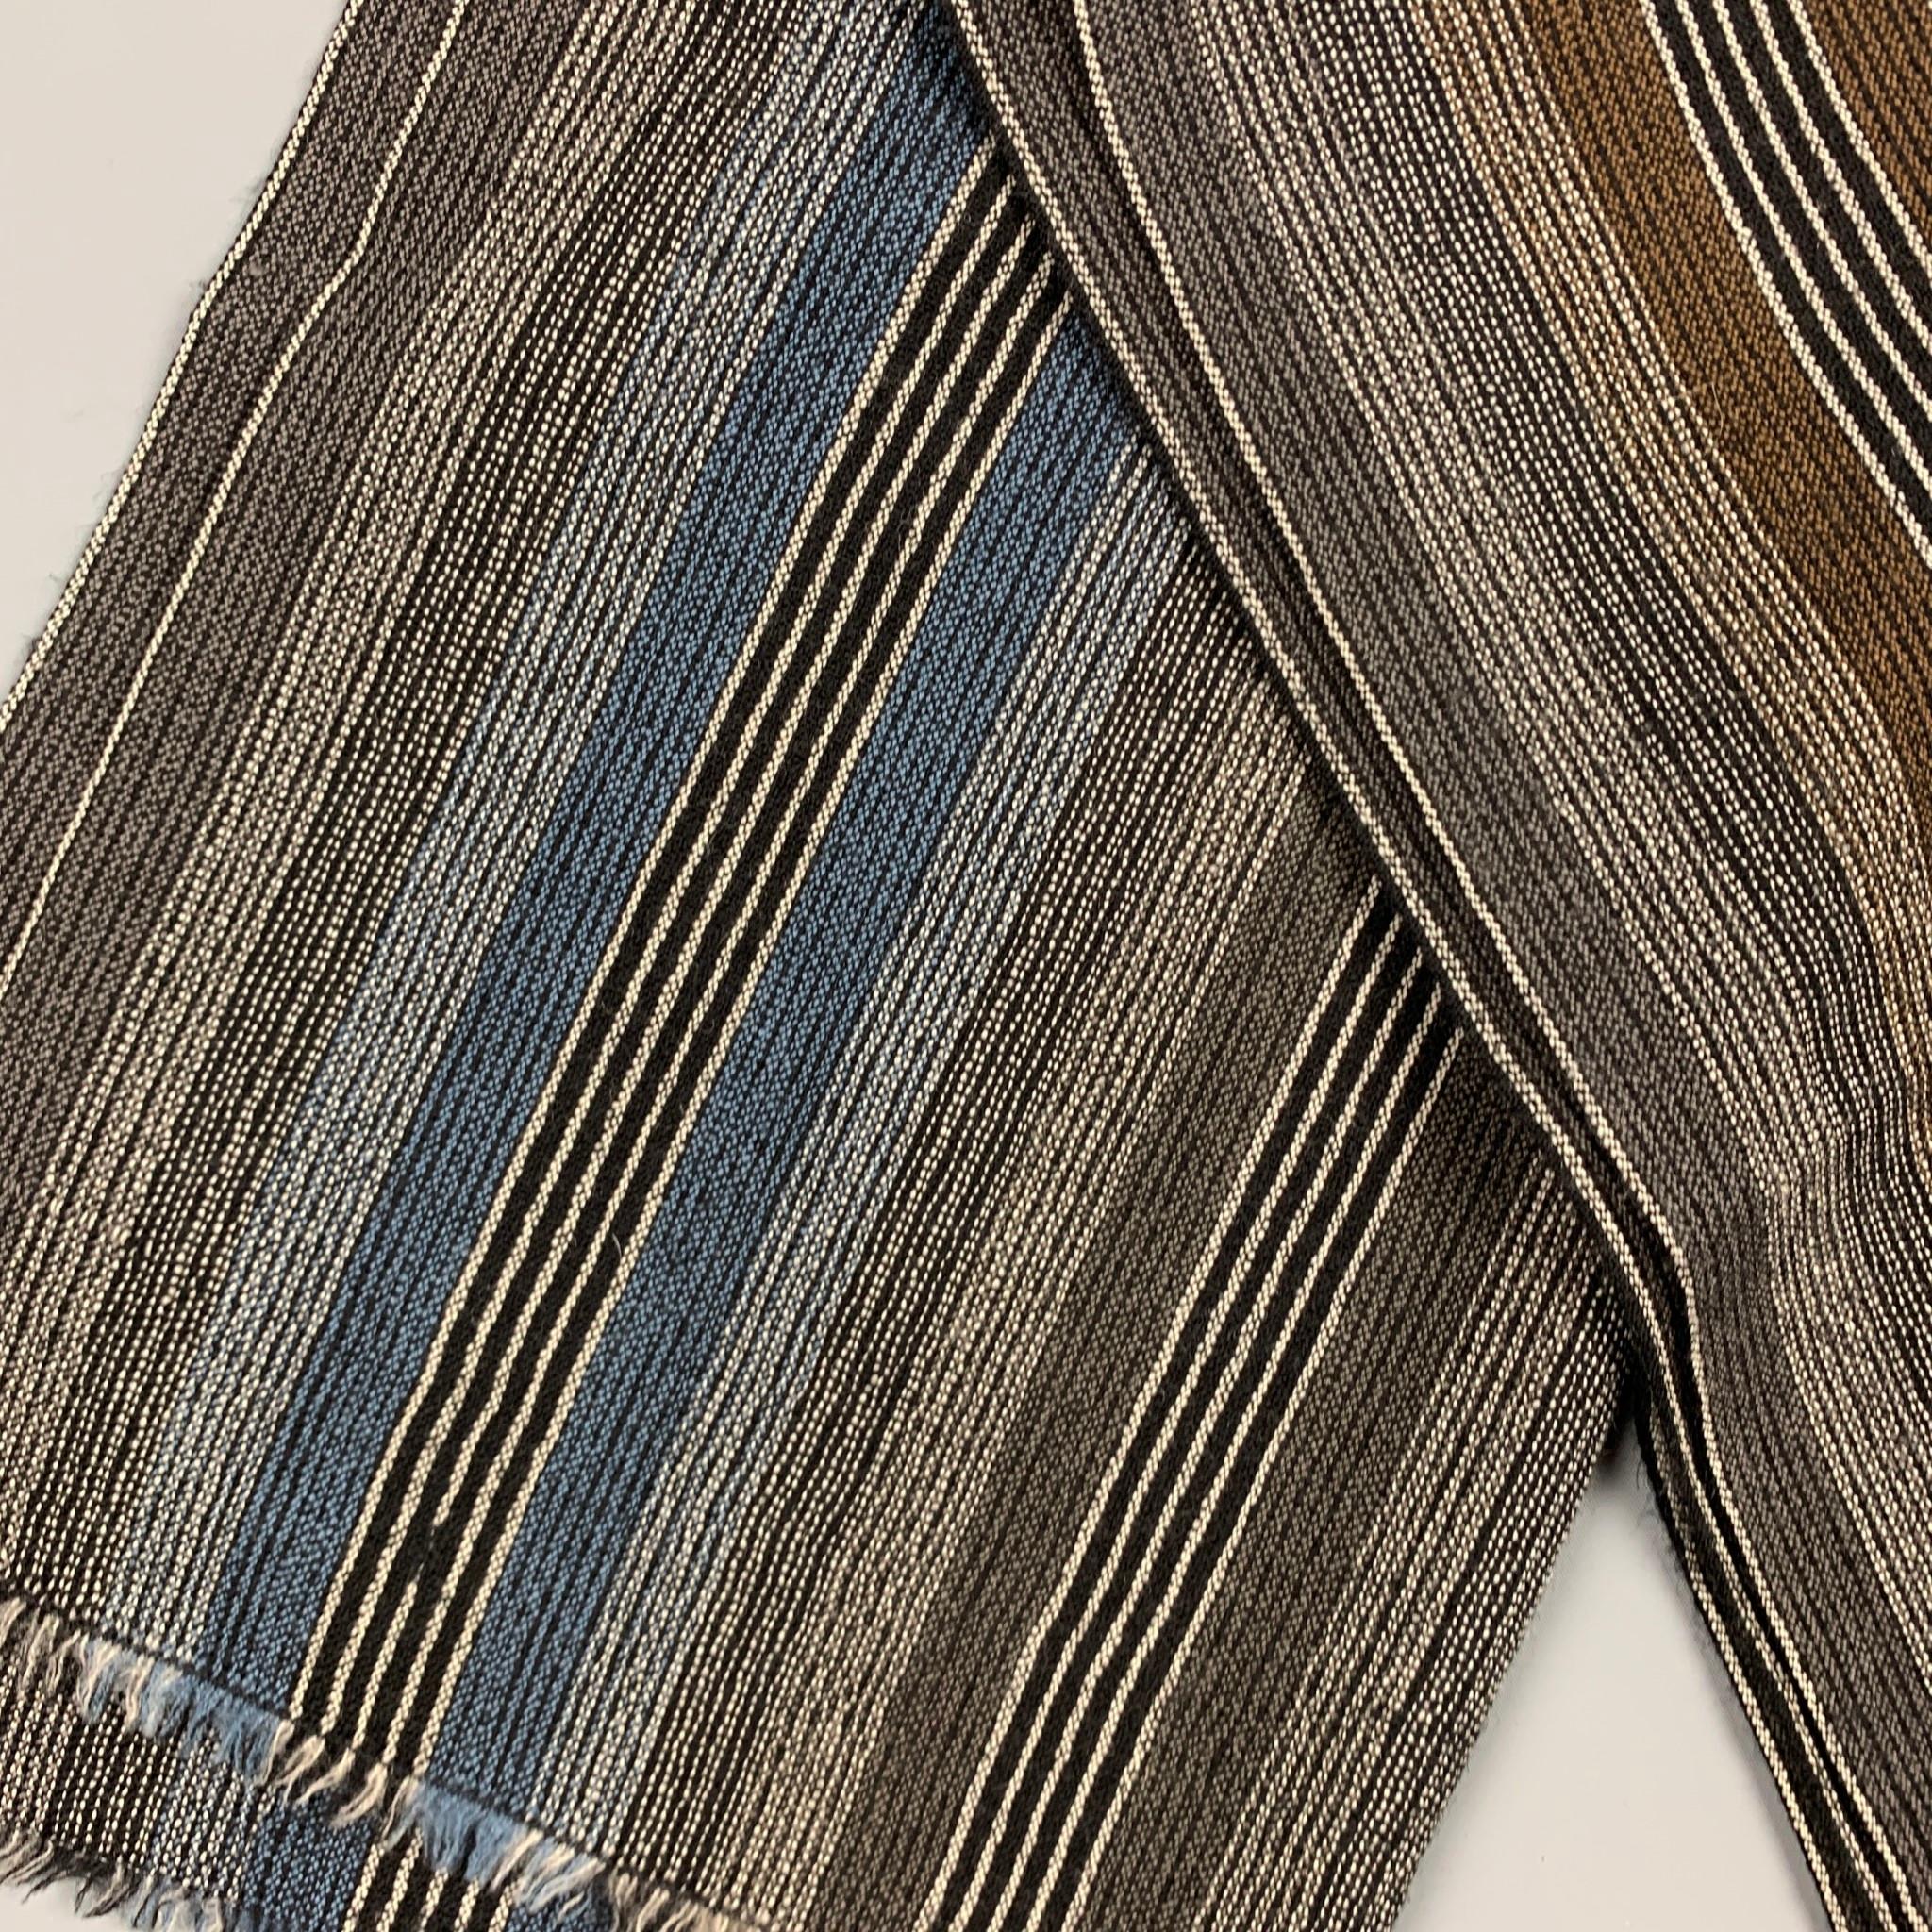 Vintage MISSONI scarf comes in a grey & brown stripe wool featuring a fringe trim. Made in Italy.

Very Good Pre-Owned Condition.

Measurements:

68 in. x 19 in. 